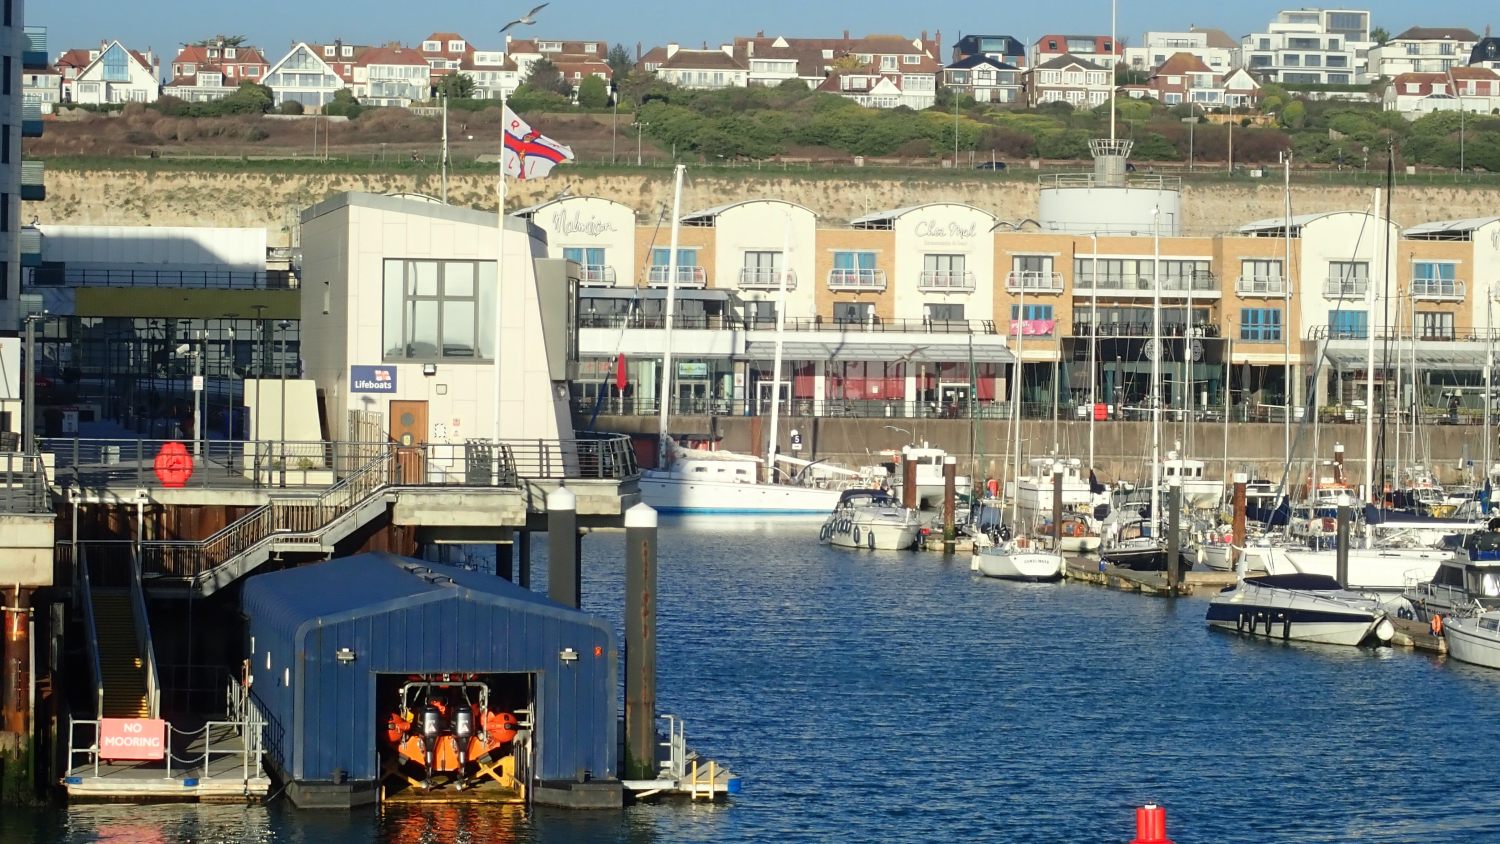 View of Brighton Lifeboat Station from the water